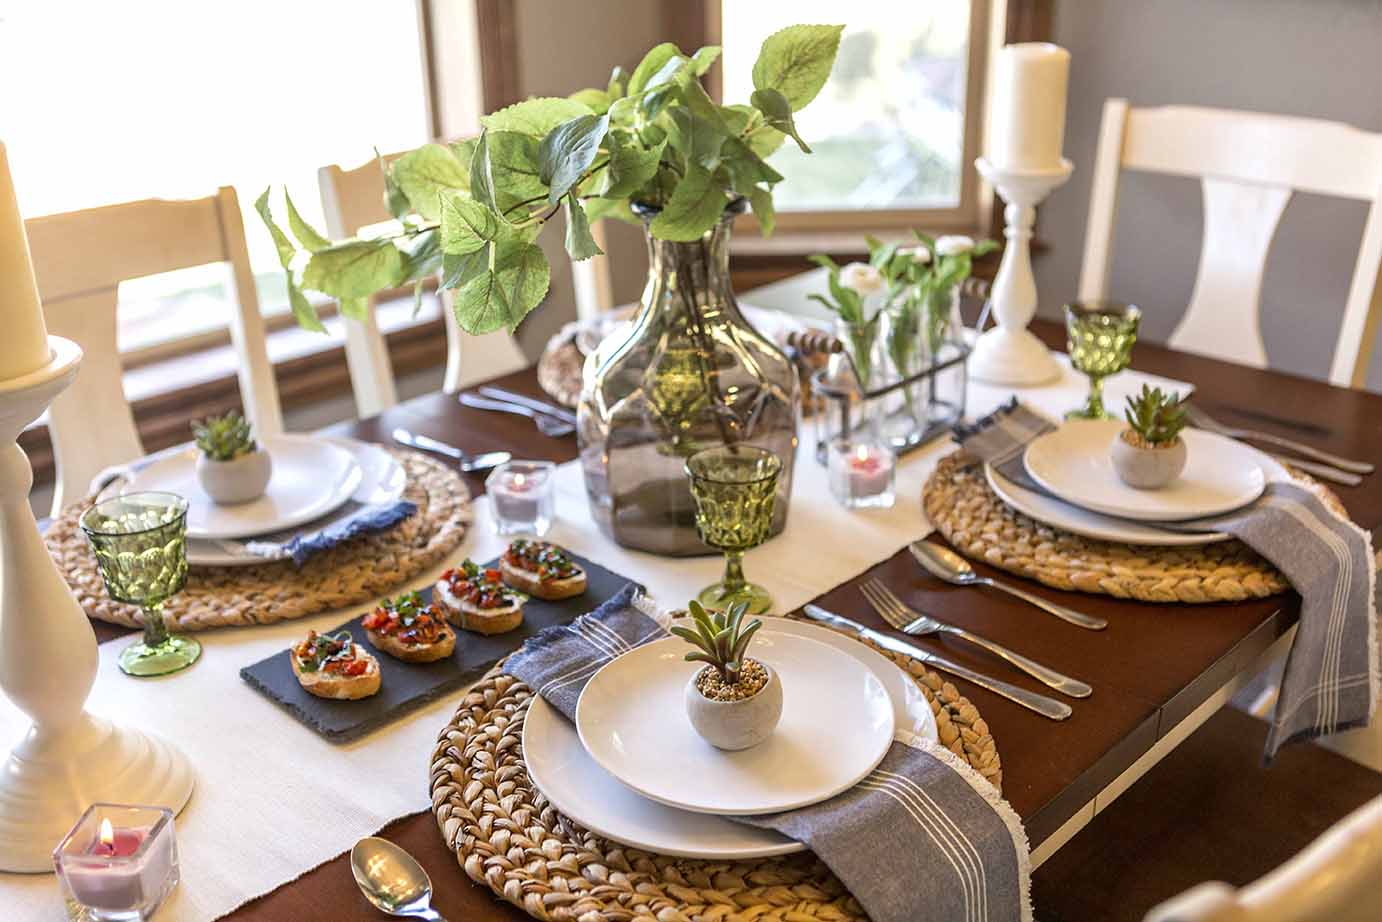 5 Tips for Creating an Affordable Modern Farmhouse Tablescape